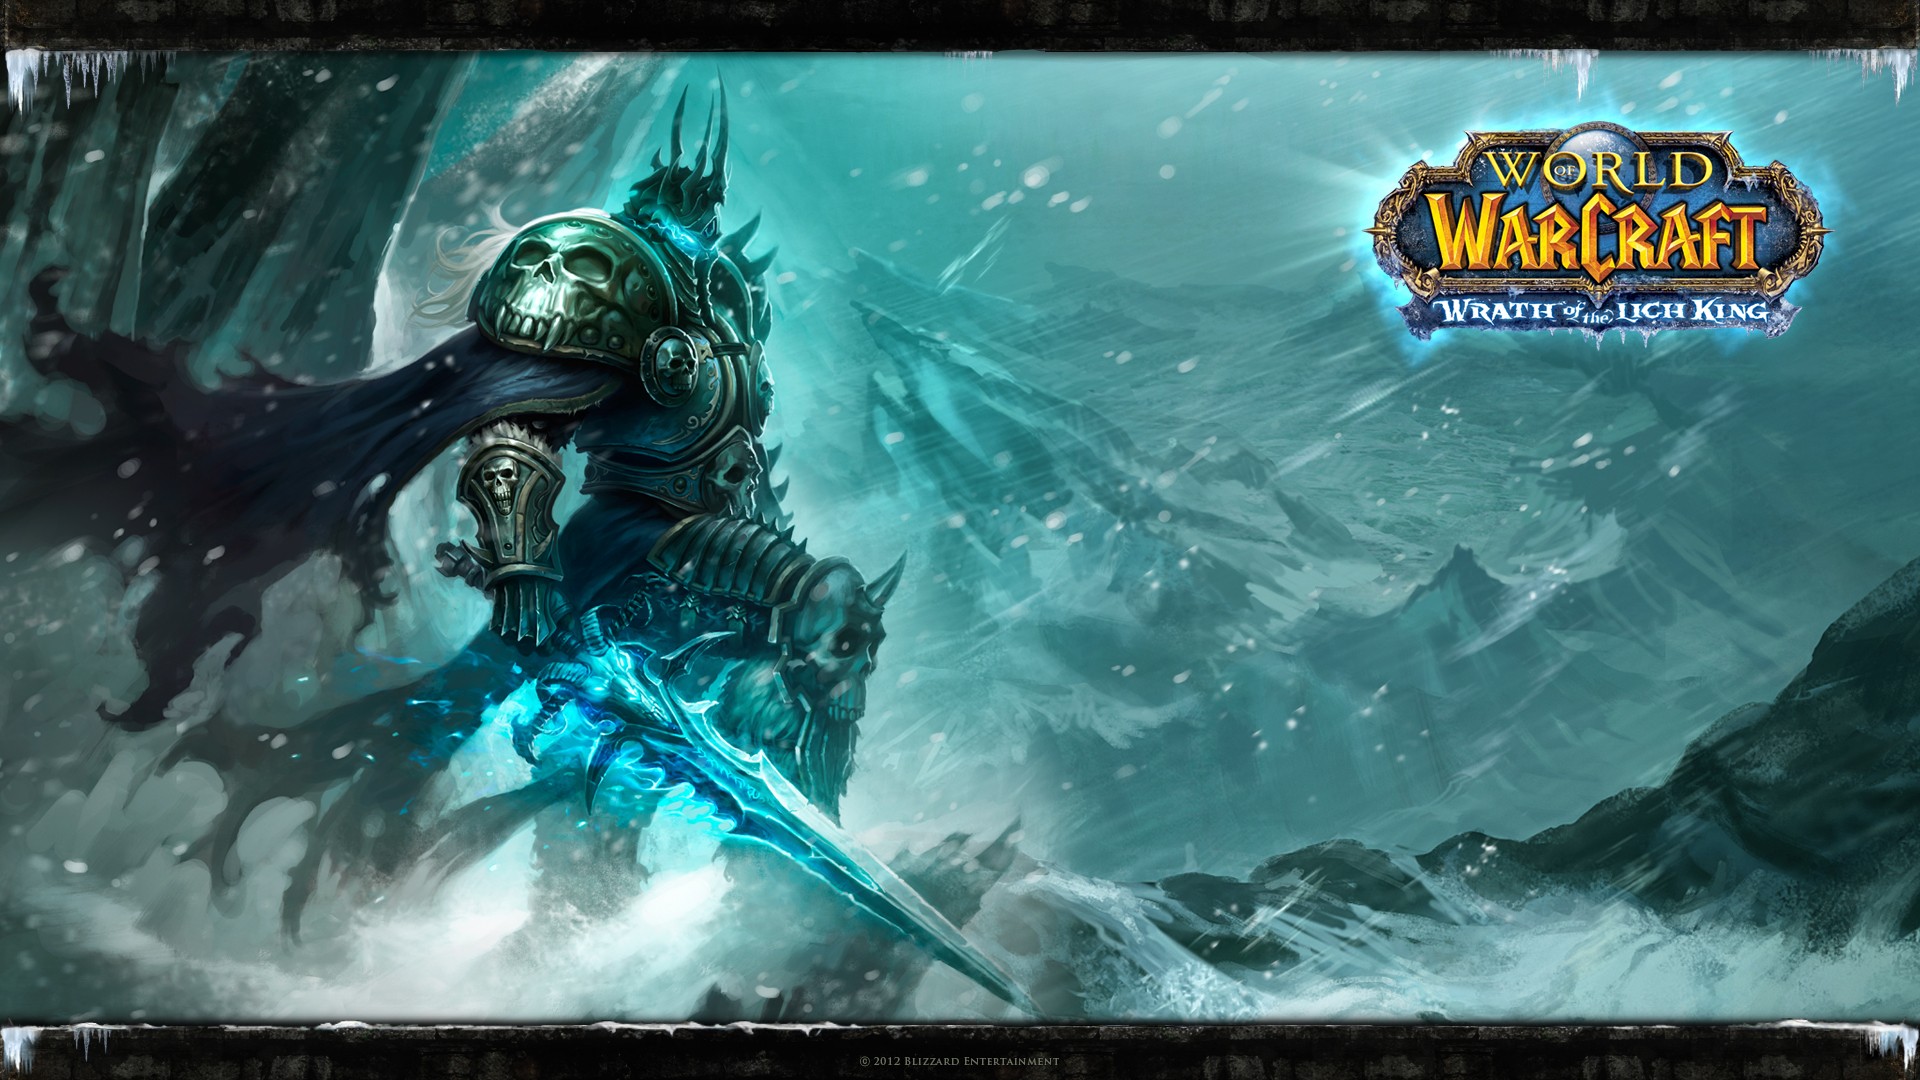 General 1920x1080 Blizzard Entertainment Warcraft World of Warcraft Arthas Menethil World of Warcraft: Wrath of the Lich King video games PC gaming 2012 (Year)